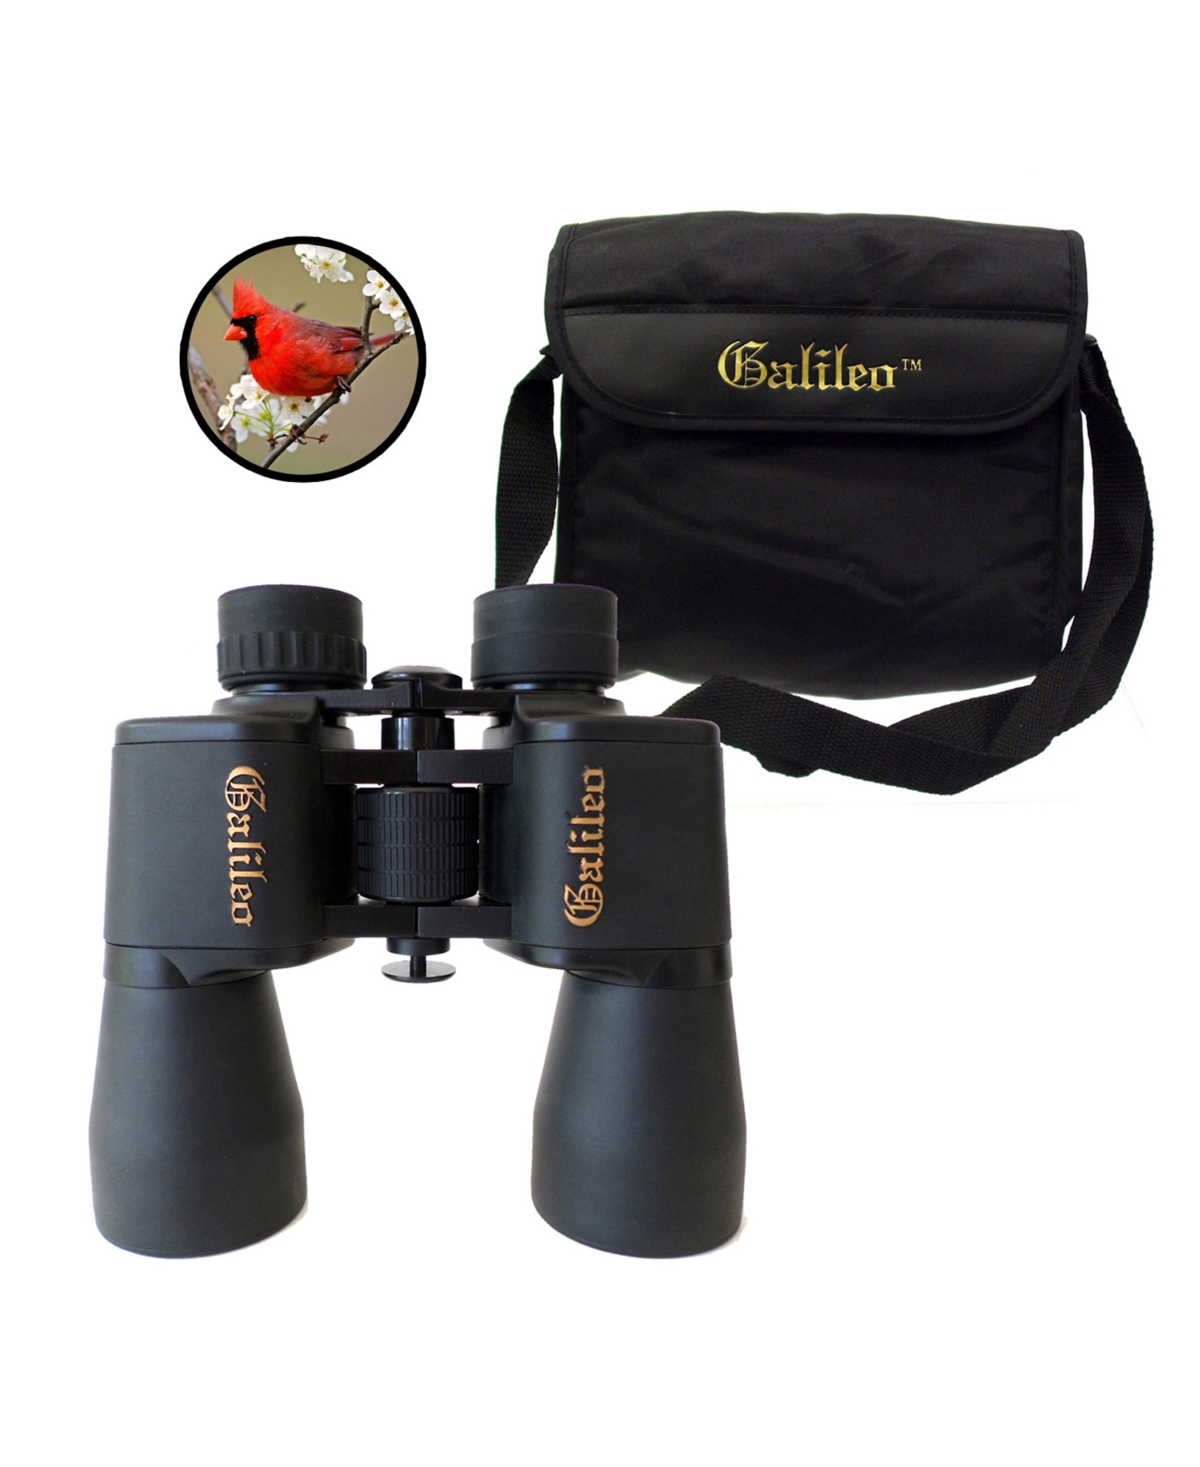 Cosmo Brands Galileo 8 Power Wide Angle Binocular With 40 Mm Lenses, Case And Shoulder Strap In Very Black